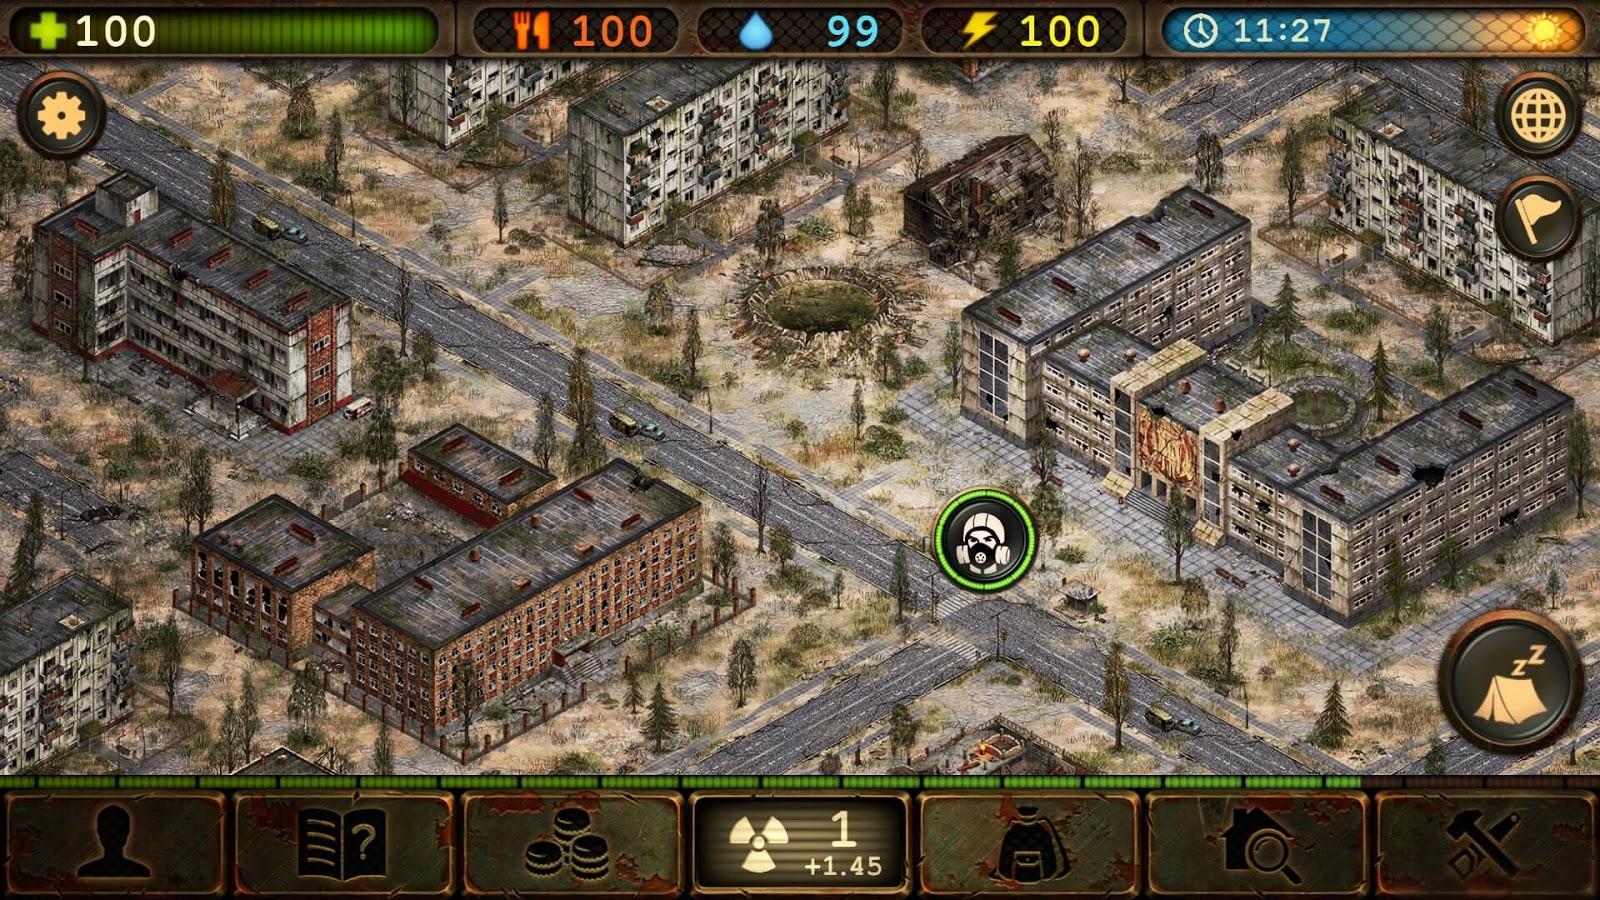 Day R Survival – Apocalypse, Lone Survivor and RPG v1.665 APK for Android